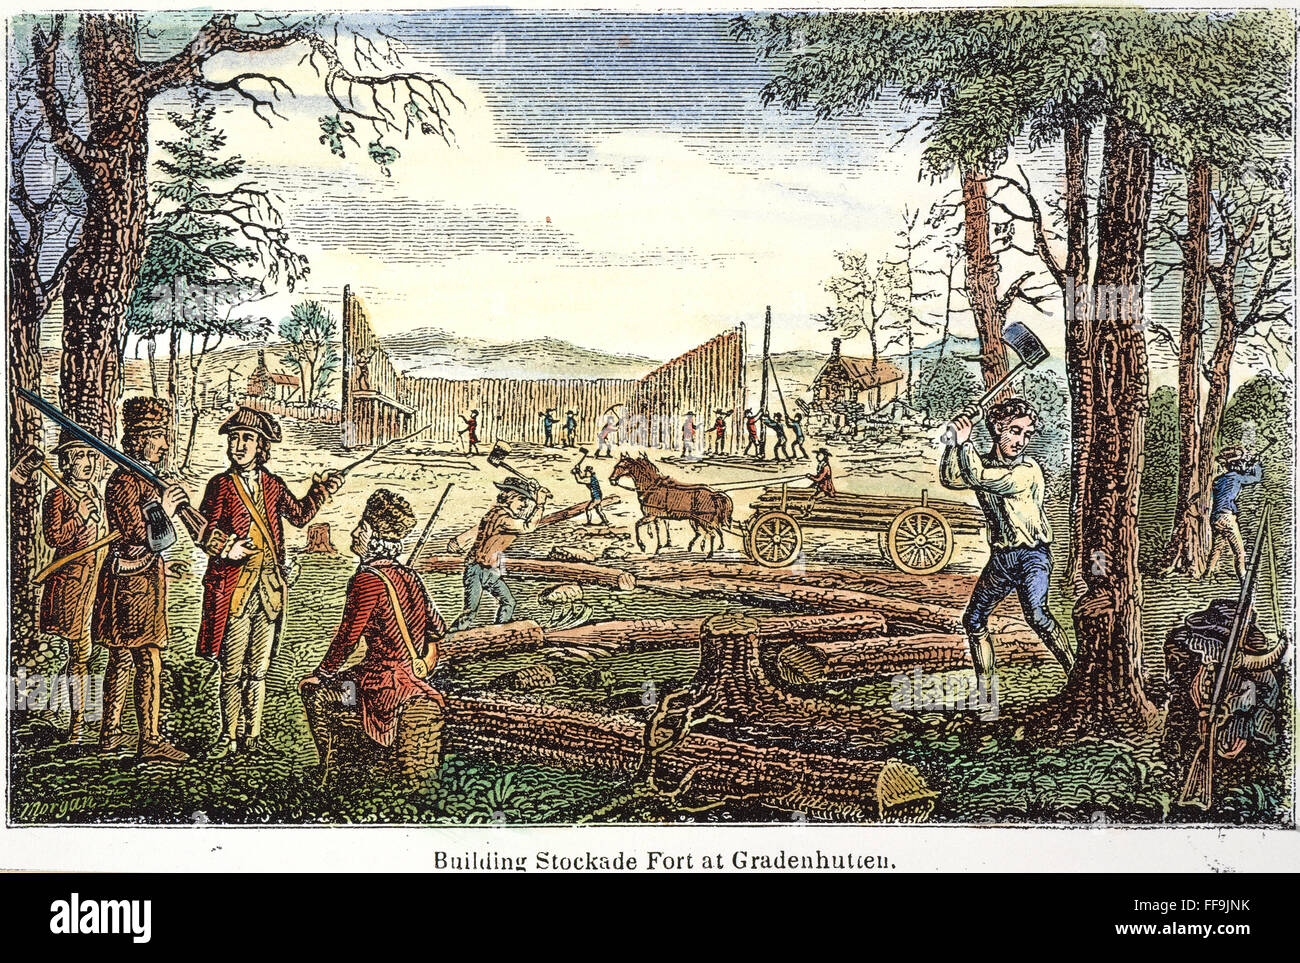 PENN: STOCKADE FORT, 1746. /nBuilding the stockade fort at the Moravian settlement of Gnadenhutten, Pennsylvania, in 1746. The settlement was destroyed and the inhabitants massacred during the French and Indian Wars: wood engraving, 19th century. Stock Photo